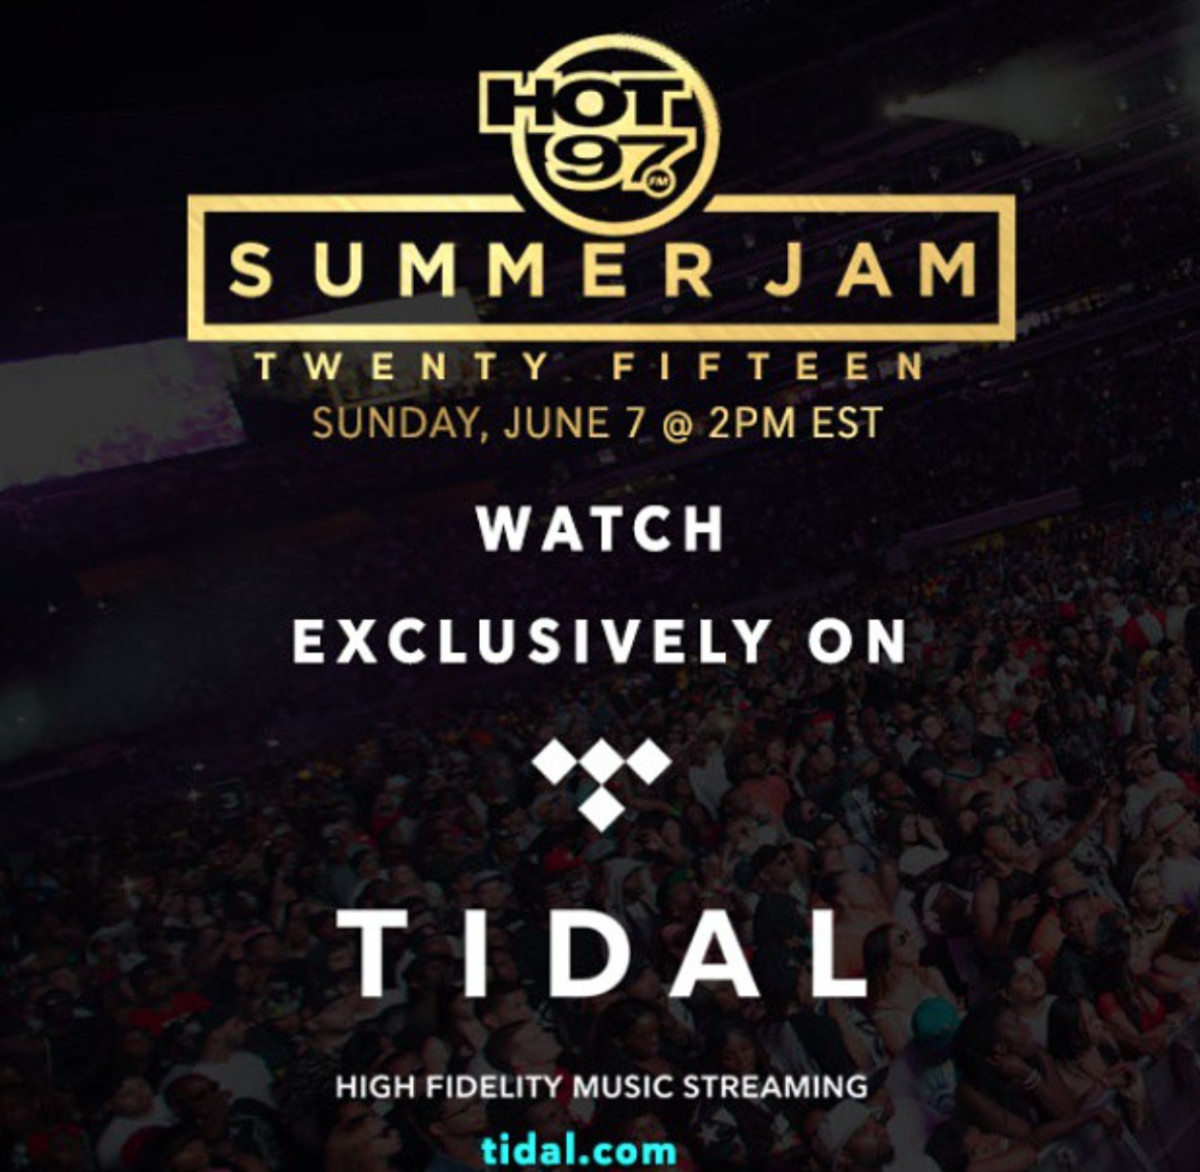 Hot 97’s Summer Jam Will Be Streamed Exclusively On Tidal Complex